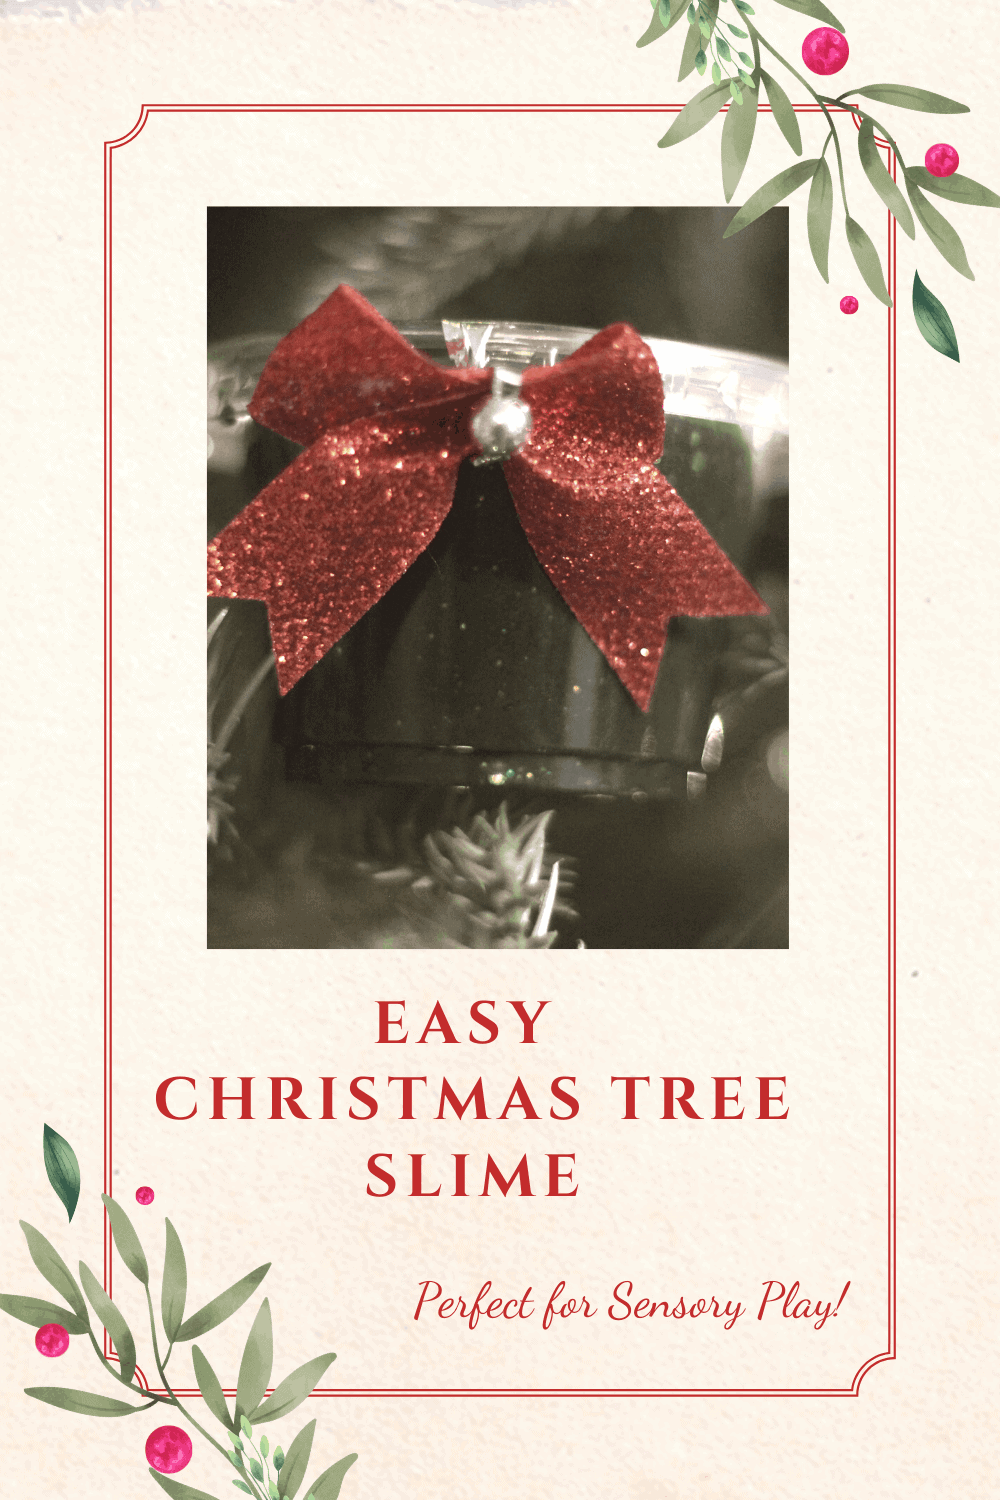 Christmas Tree slime recipe perfect as a Christmas slime recipe or as a holiday party favor idea. Perfect slime for sensory play! 